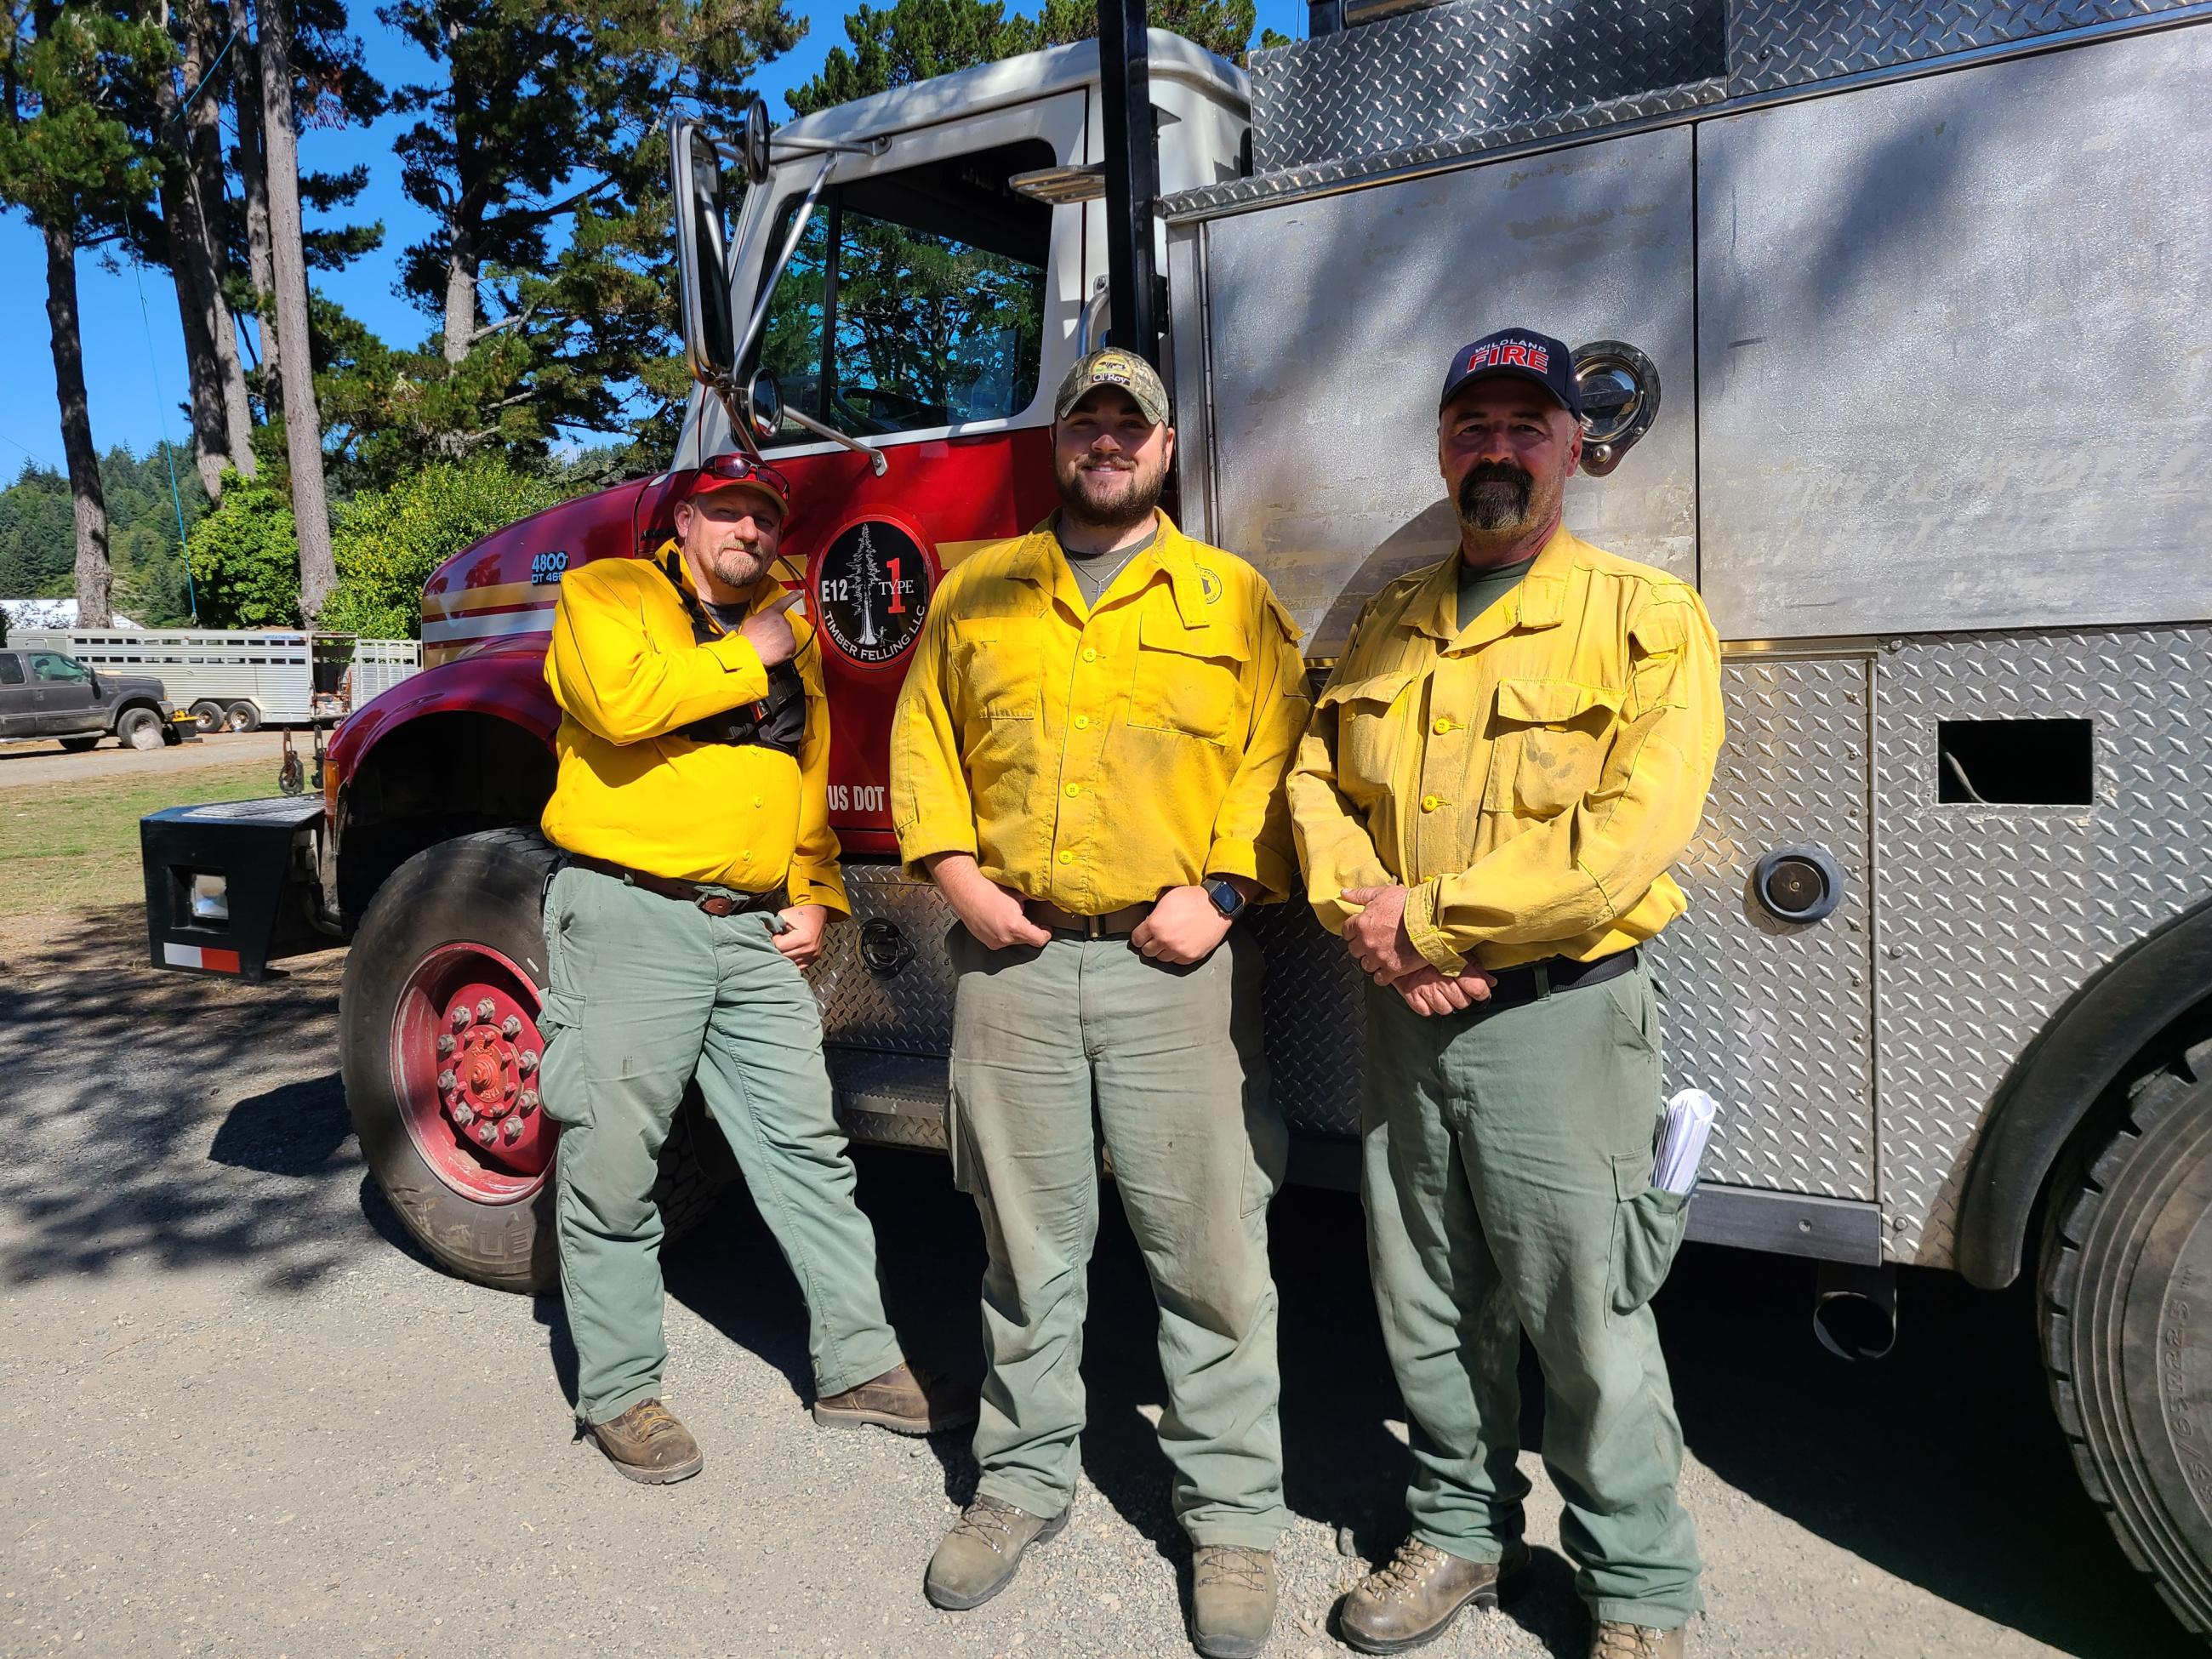 The Timber Felling LLC engine crew of Ricky Howell, Zach Parker, and Steve Hughes from Grants Pass, Oregon, assigned to the Structure Protection Group serving on Elk River Road